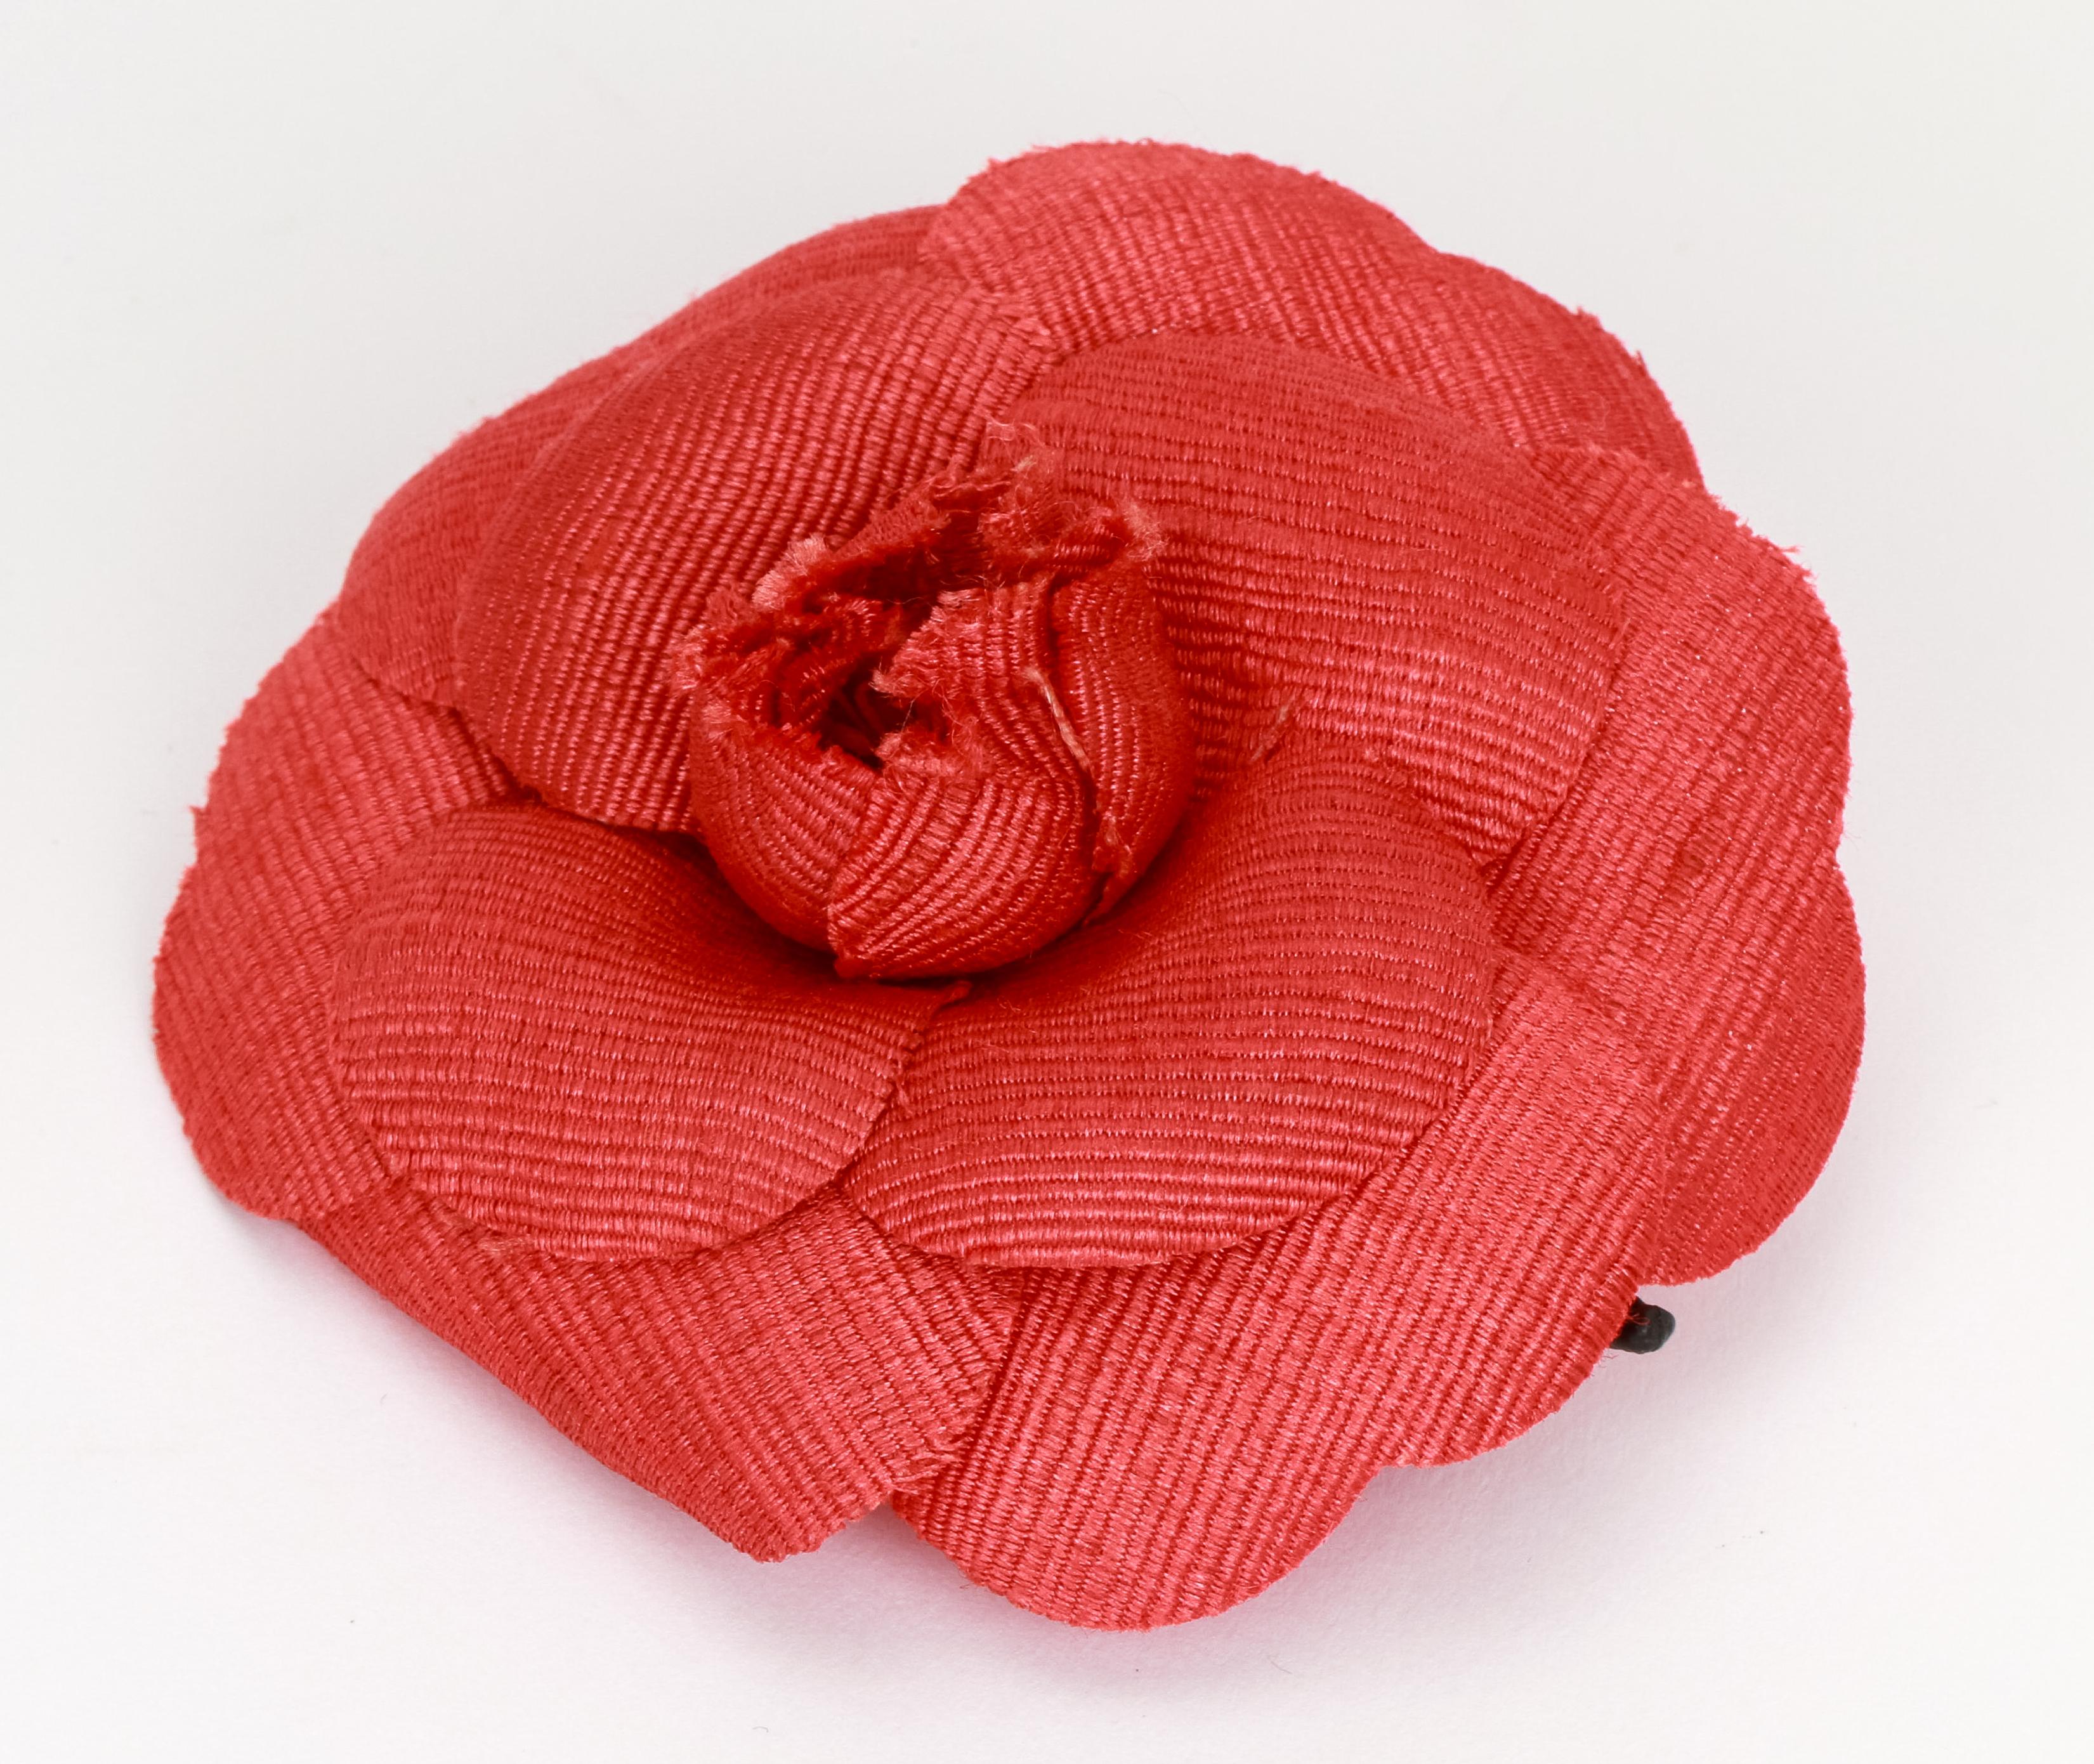 Women's Chanel large red fabric camellia brooch